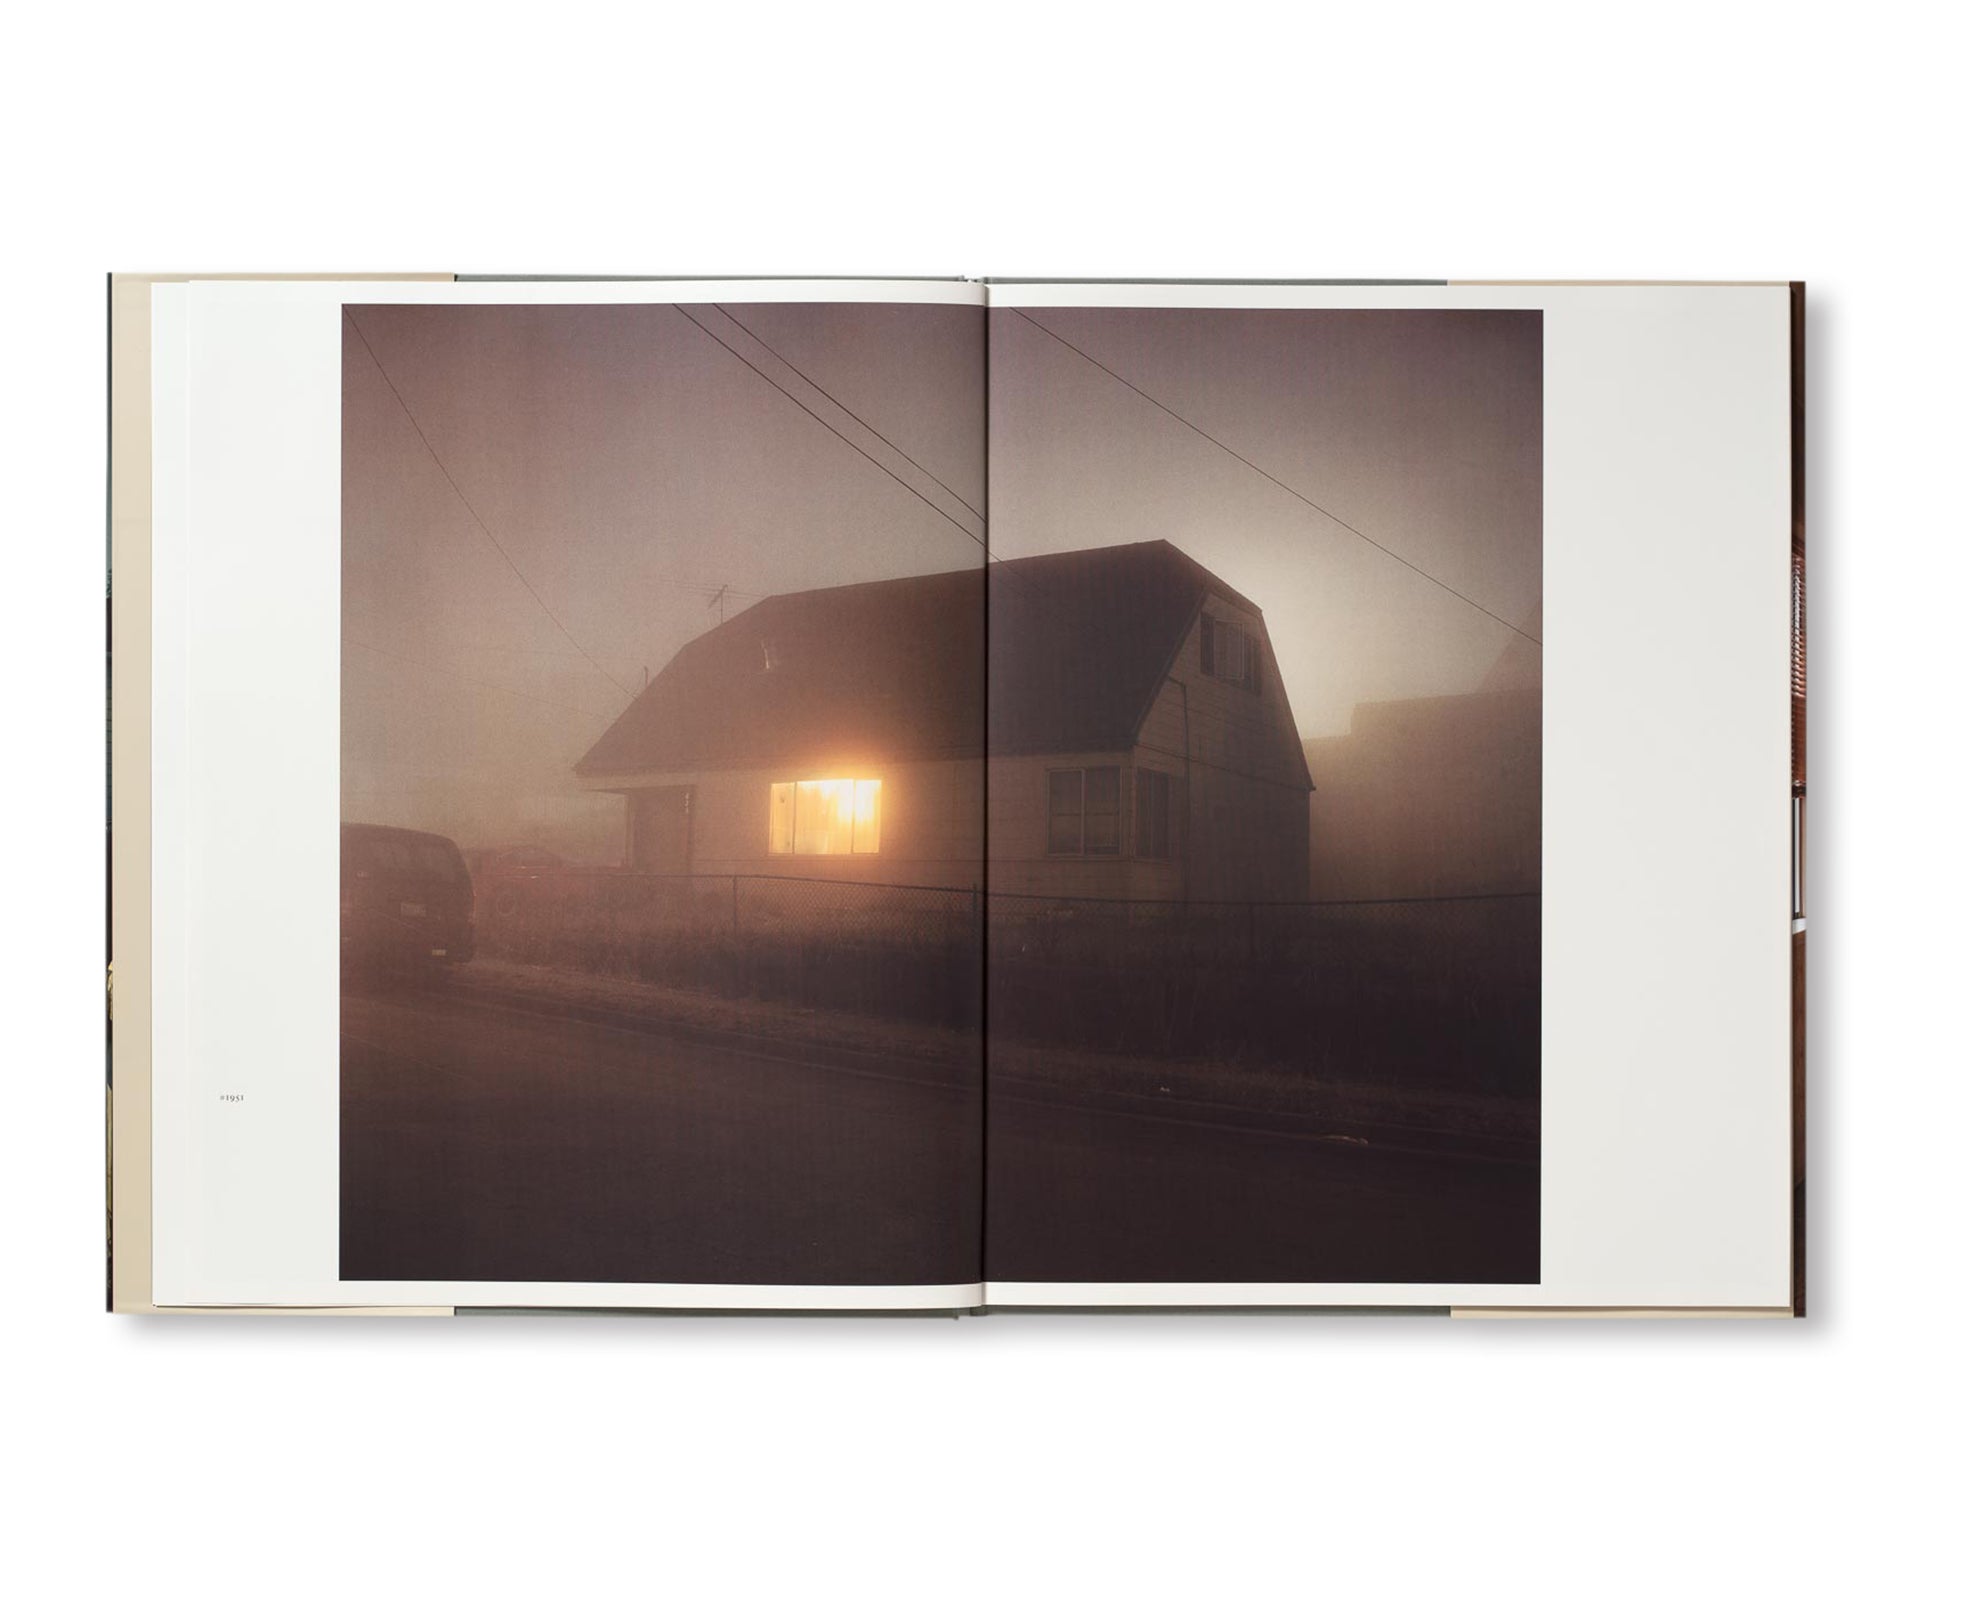 HOUSE HUNTING by Todd Hido – twelvebooks